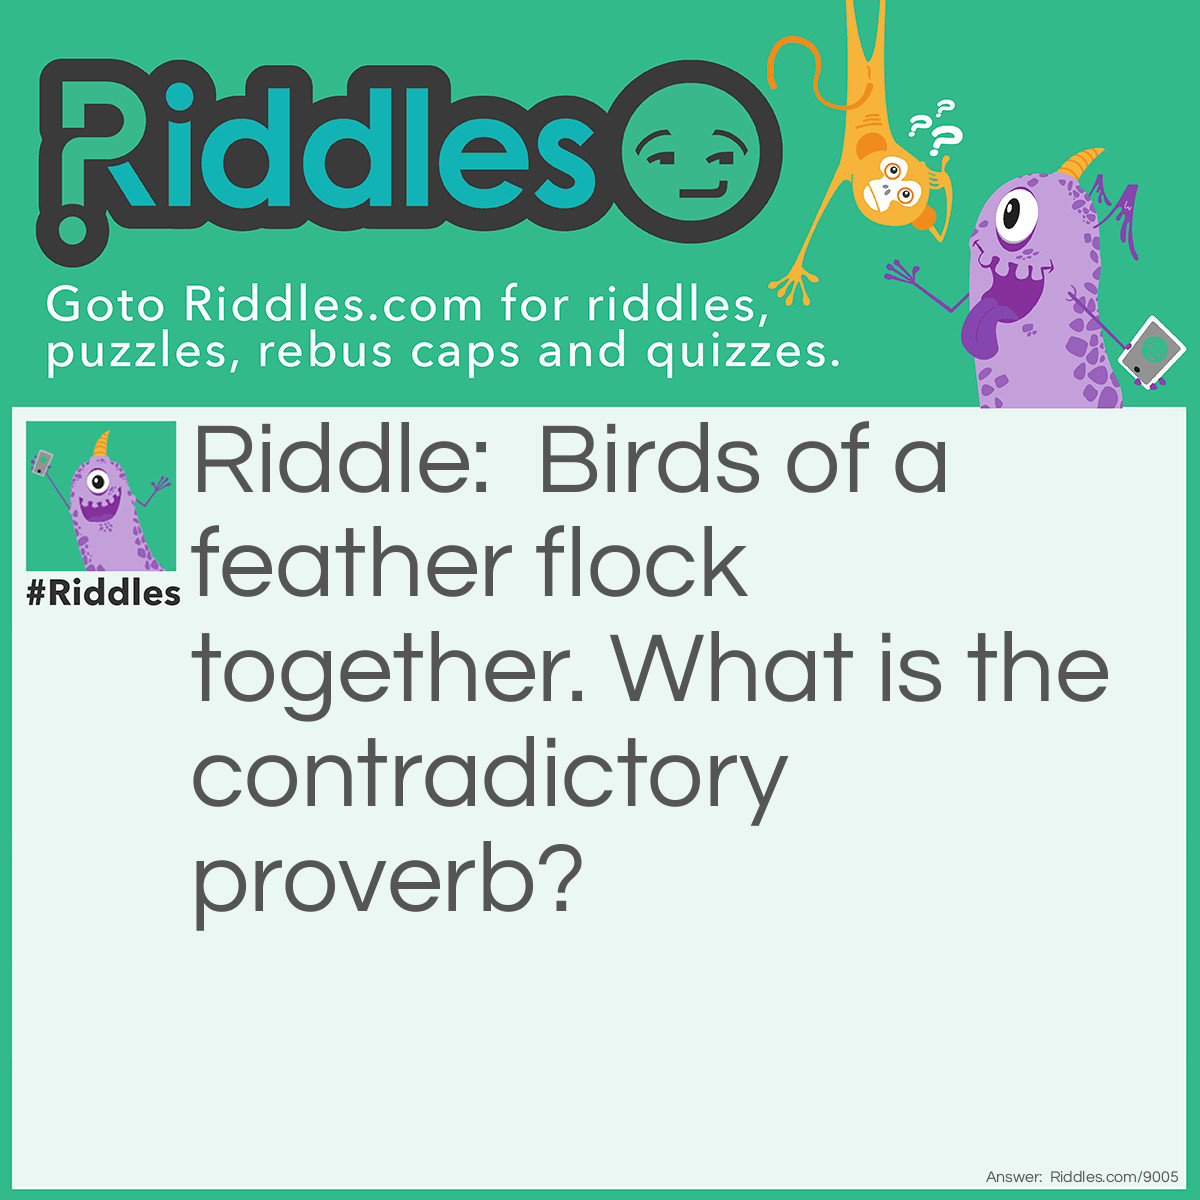 Riddle: Birds of a feather flock together. What is the contradictory proverb? Answer: Opposites attract.